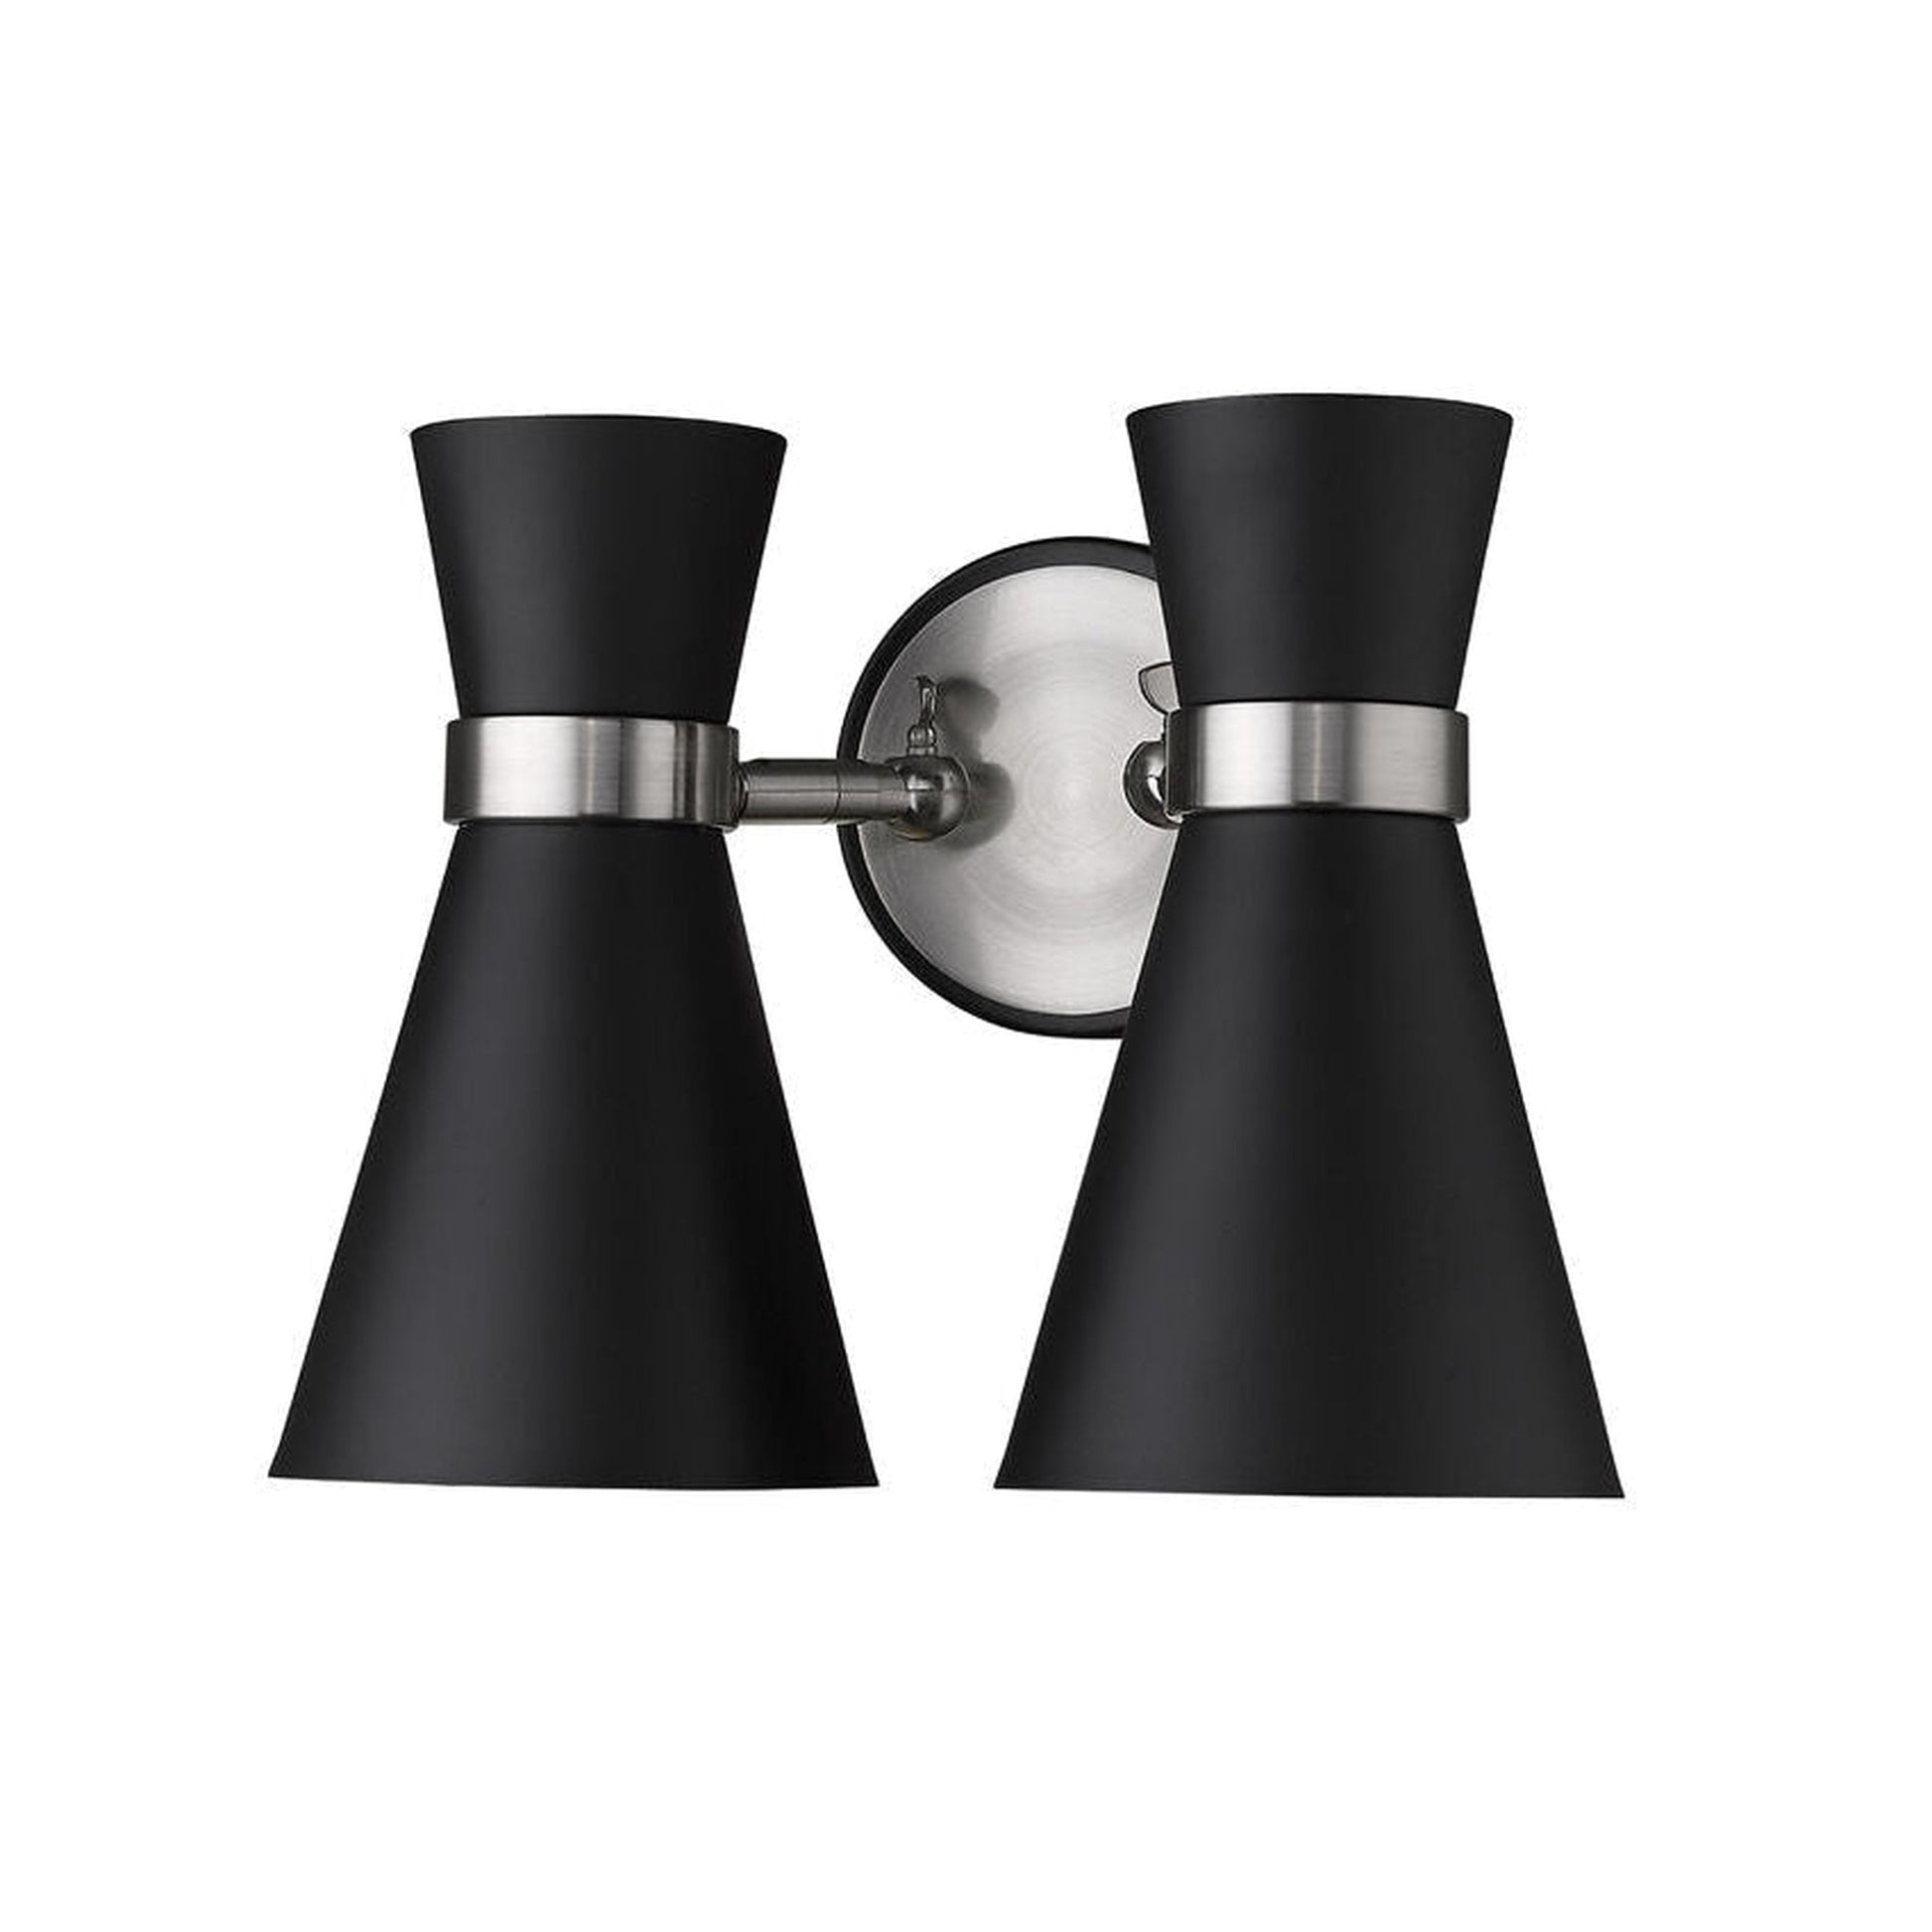 Z-Lite Soriano 12" 2-Light Matte Black and Brushed Nickel Wall Sconce With Matte Black Metal Shade